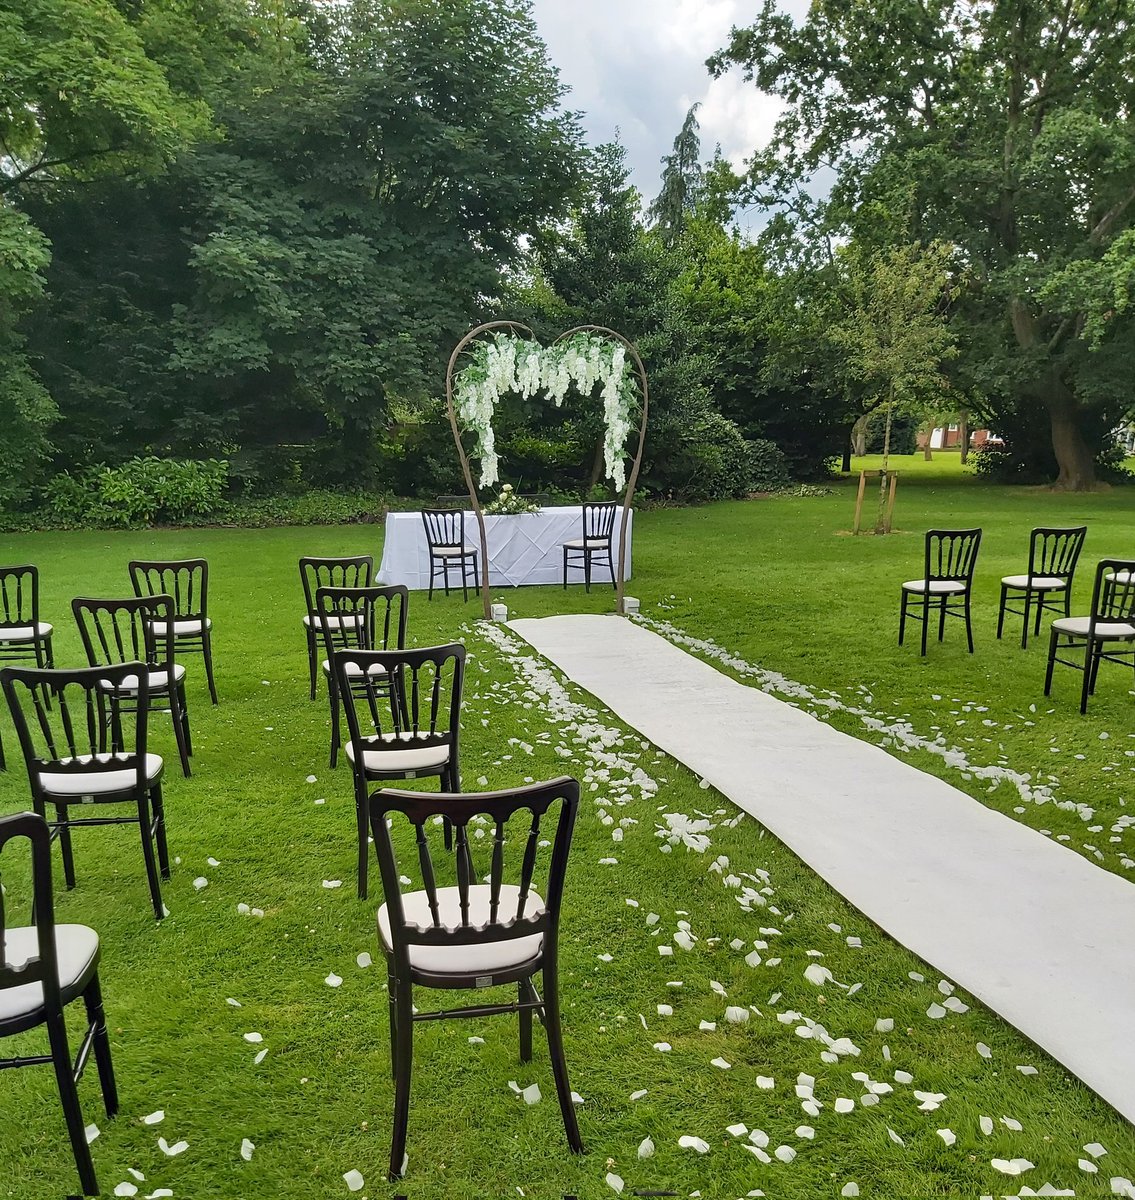 A stunning outdoor wedding ceremony at @EdgbastonPark ❤had great fun playing the violin here today🎻👰🤵💍 #weddingviolinist #birminghamweddings #violinist #birminghamweddingvenue #weddinginspiration